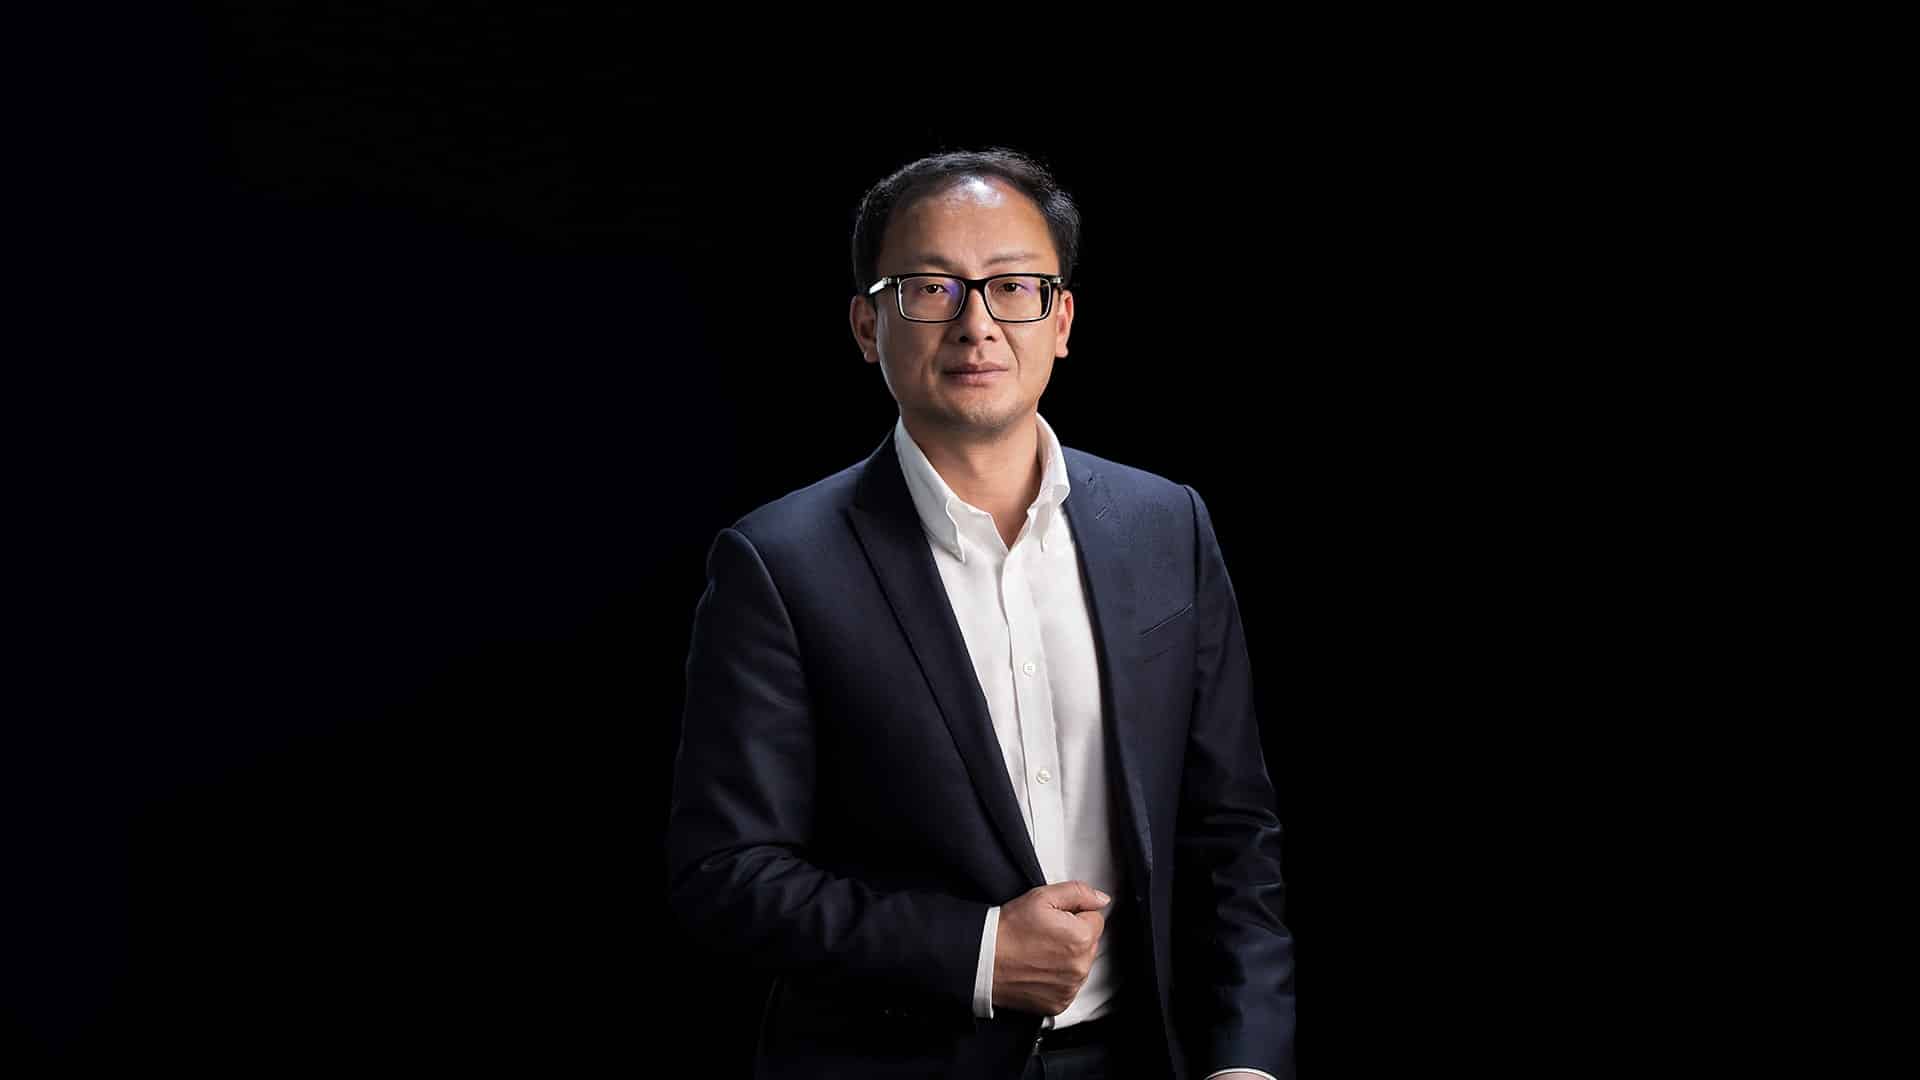 Faraday Future Board of Directors Appoints Xuefeng (“XF”) Chen as Global Chief Executive Officer to Boost the FF 91 Futurist Production and Achieve the Long-Term Goals of the Company